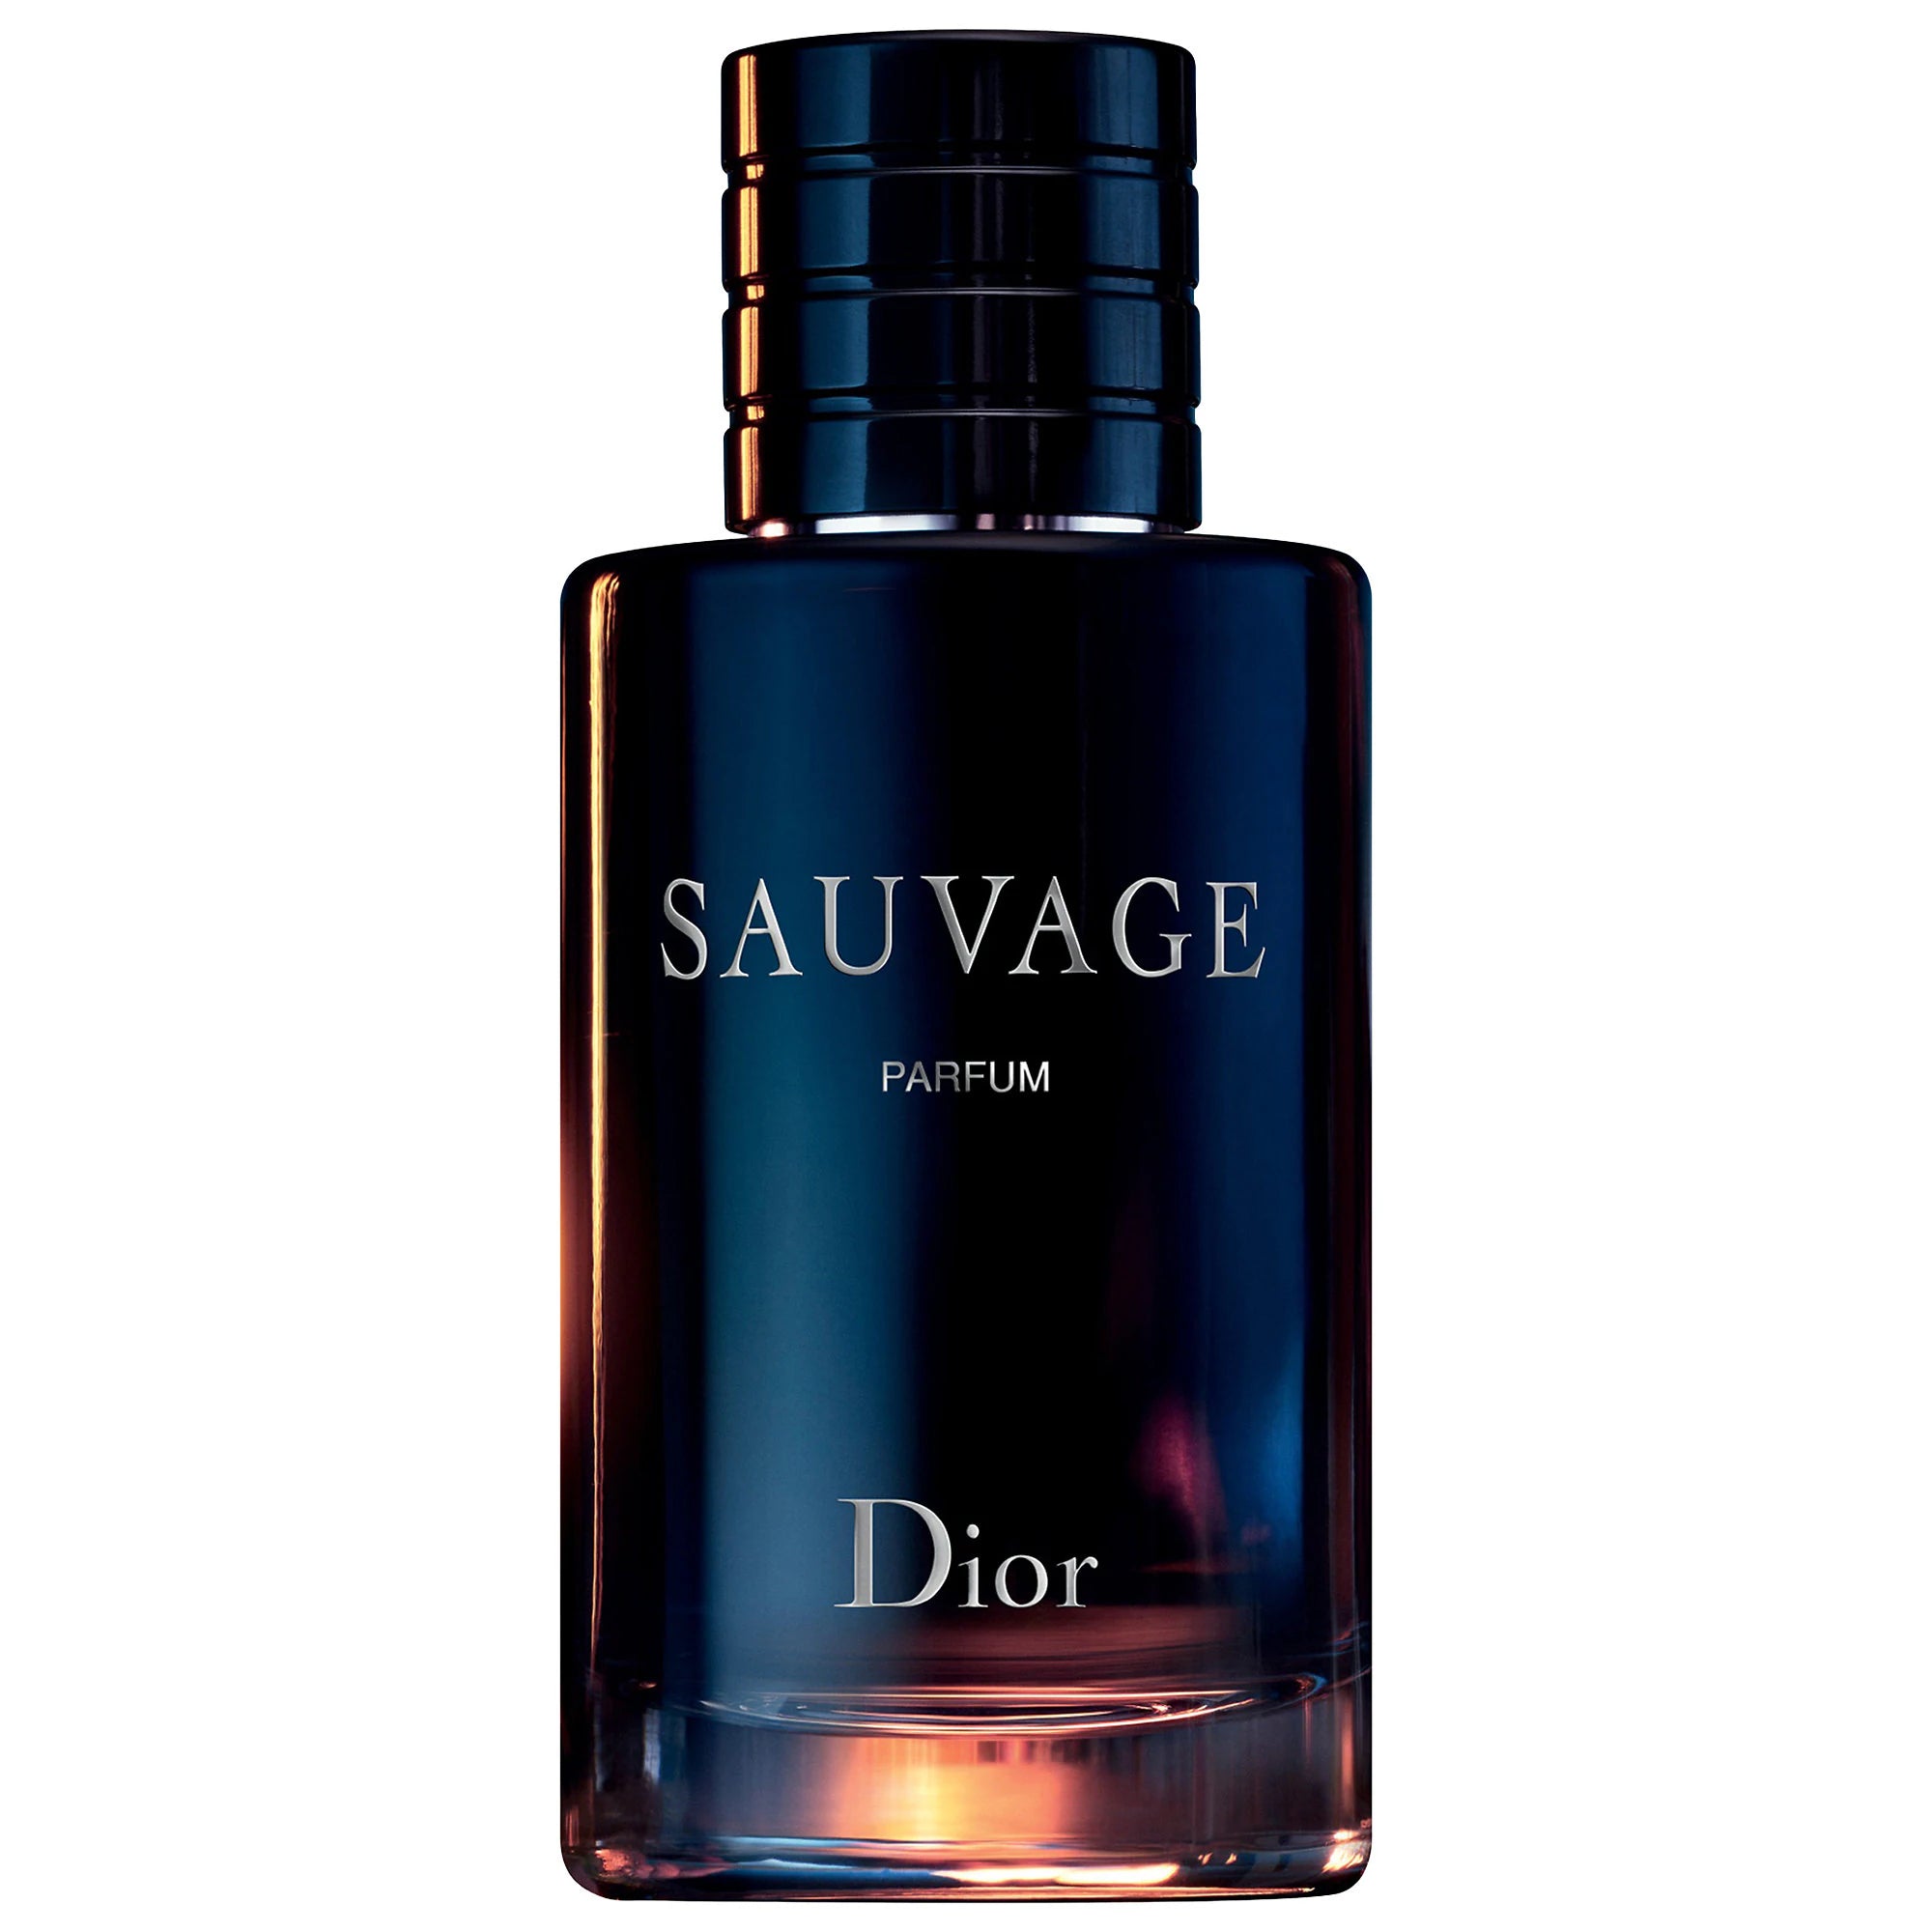 Johnny picard inspired by Sauvage  DIOR